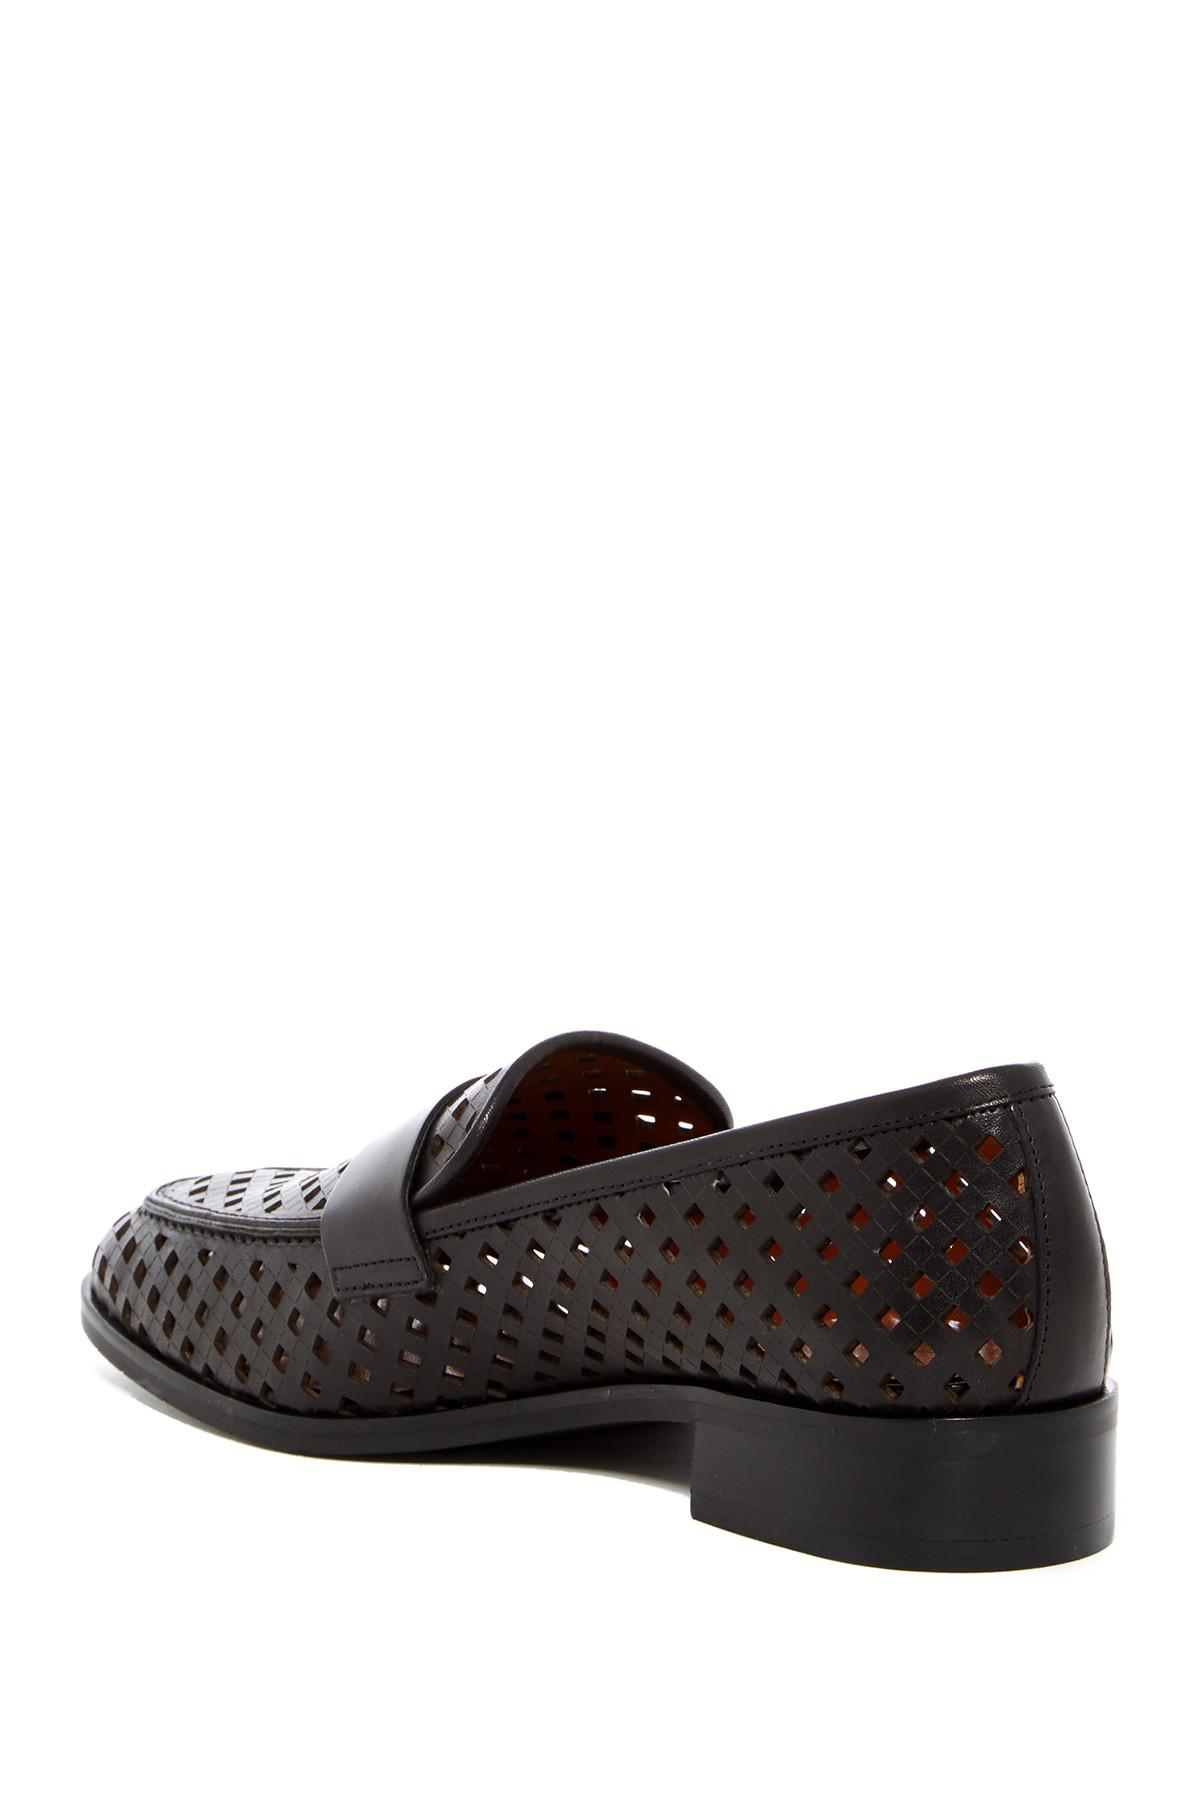 Aquatalia Leather Sheryl Perforated Loafer (women) in Black - Lyst